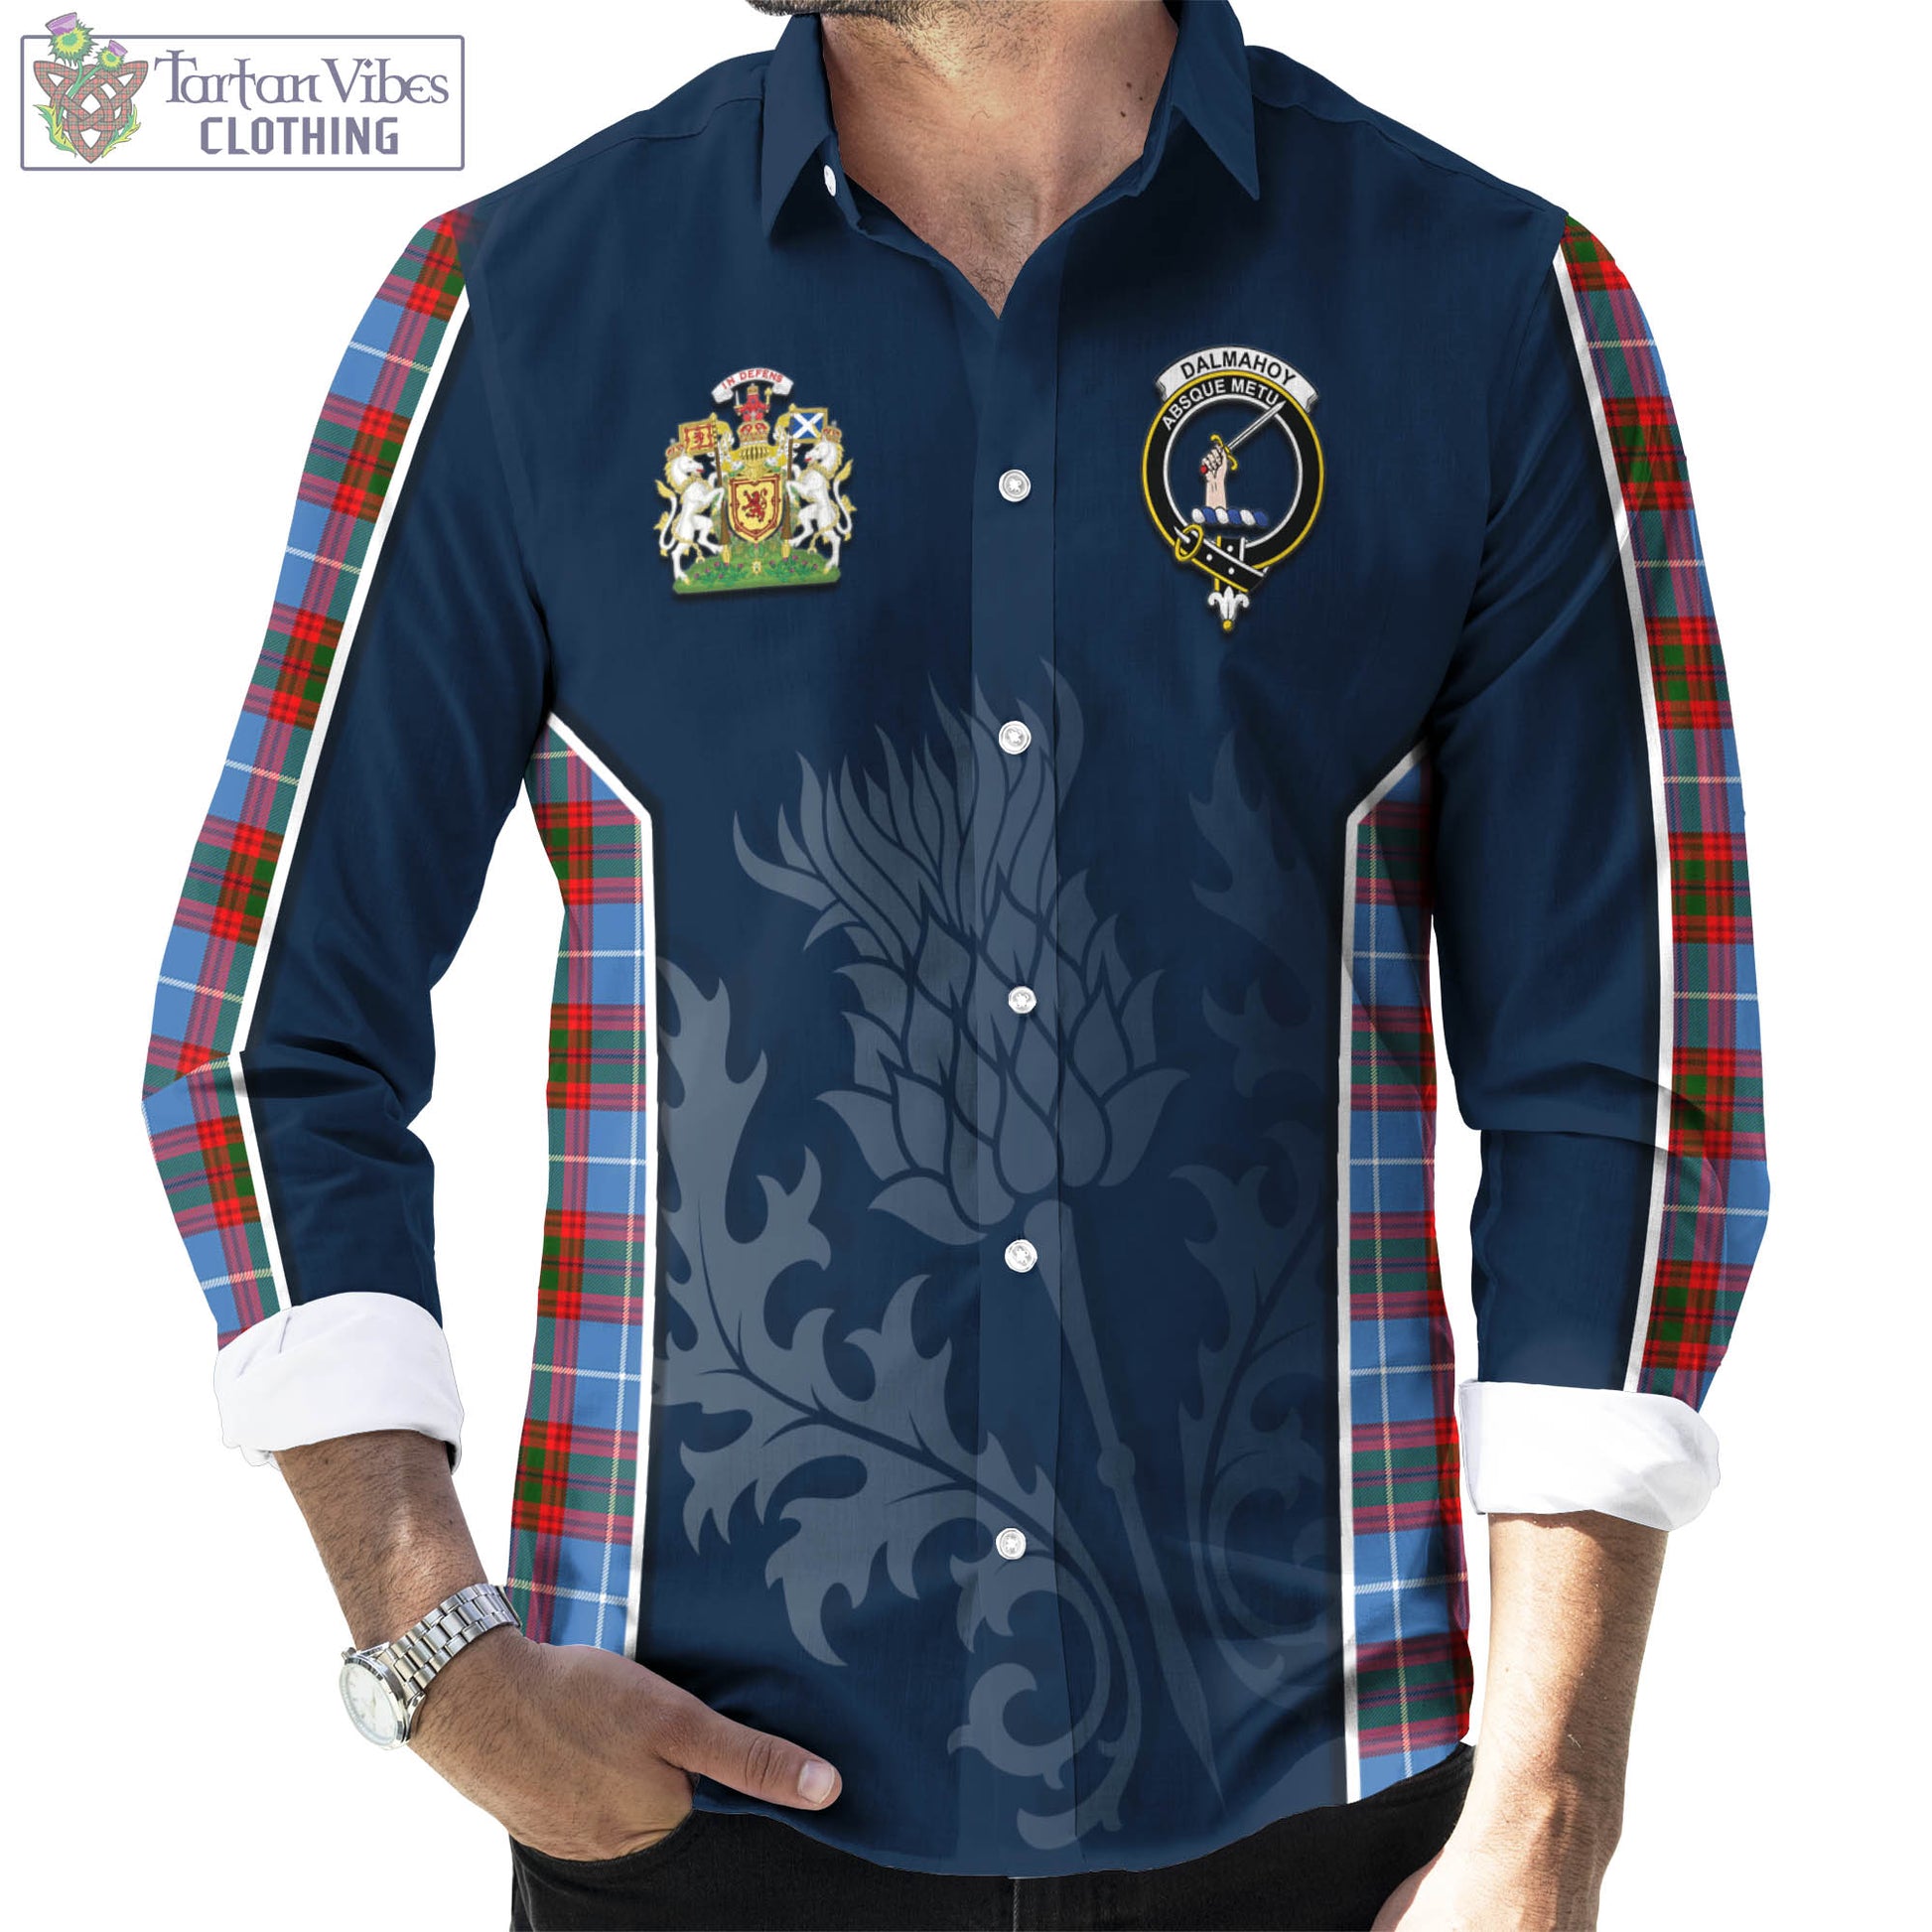 Tartan Vibes Clothing Dalmahoy Tartan Long Sleeve Button Up Shirt with Family Crest and Scottish Thistle Vibes Sport Style